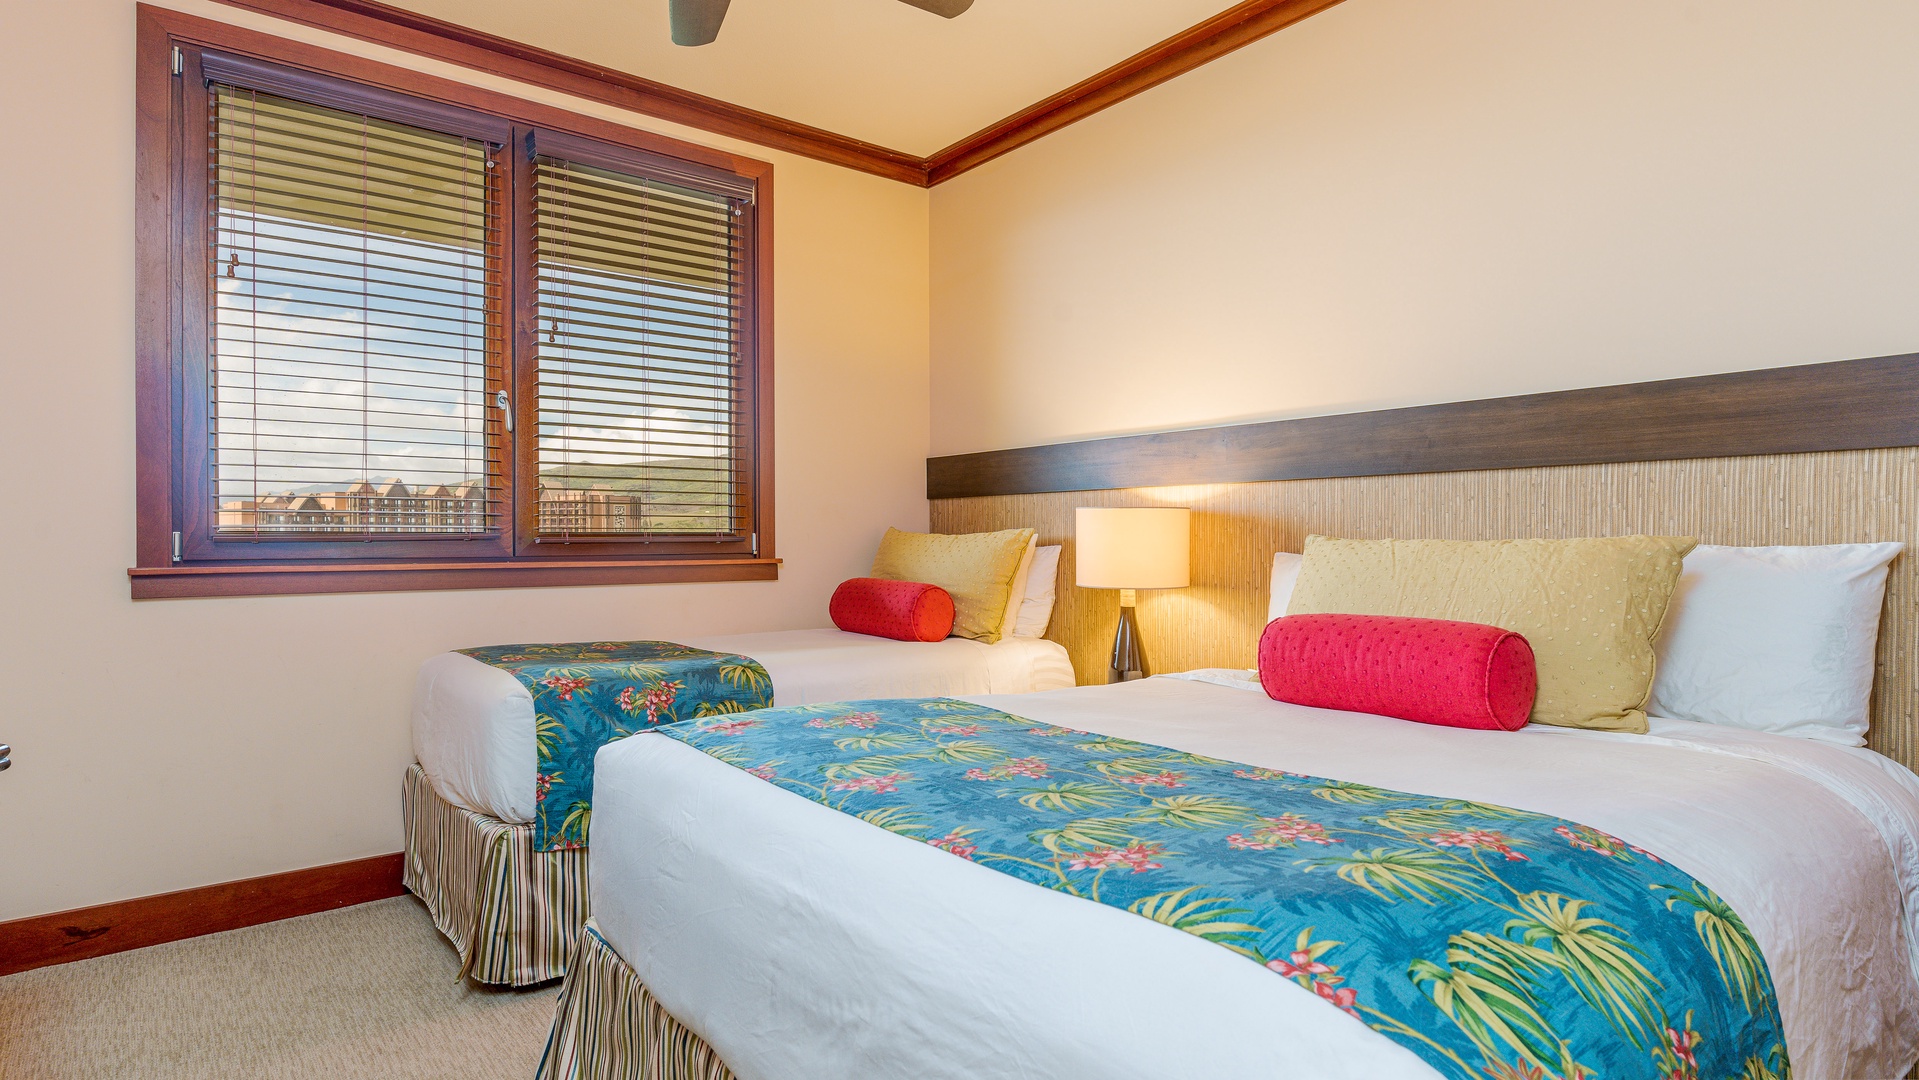 Kapolei Vacation Rentals, Ko Olina Beach Villas B1101 - The second guest bedroom with bright tropical patterns and soft lighting.